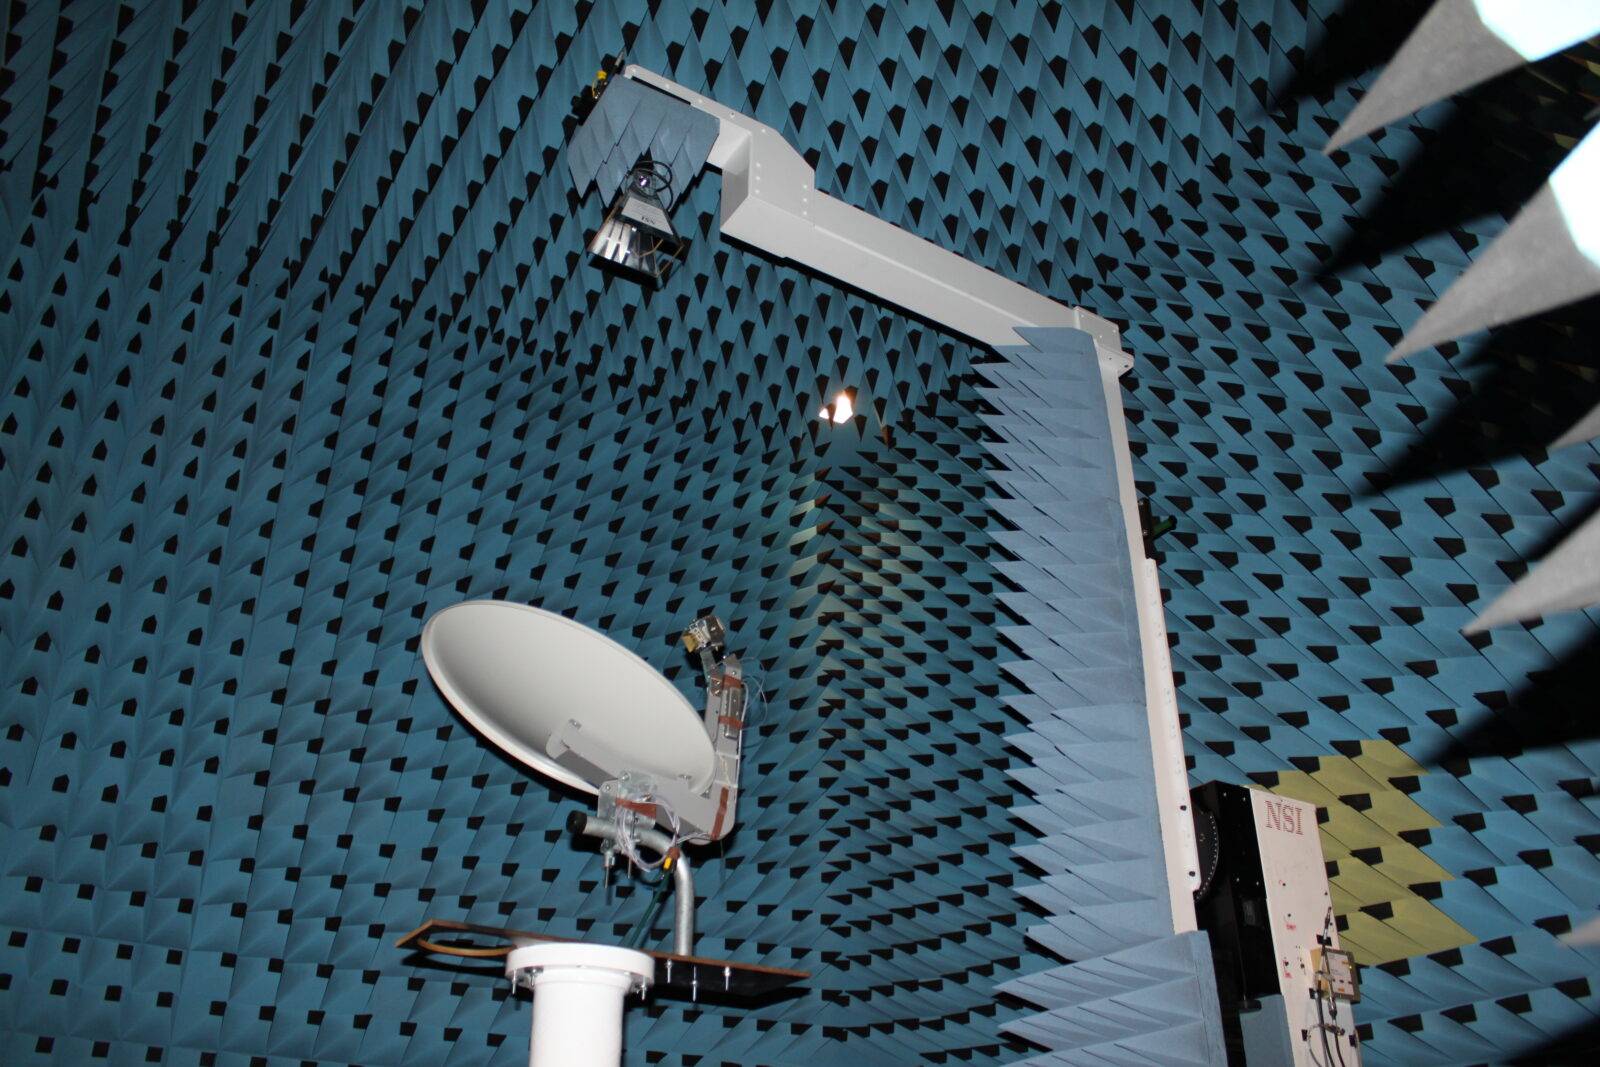 Measurement setup for pattern measurement in the shielded anechoic chamber